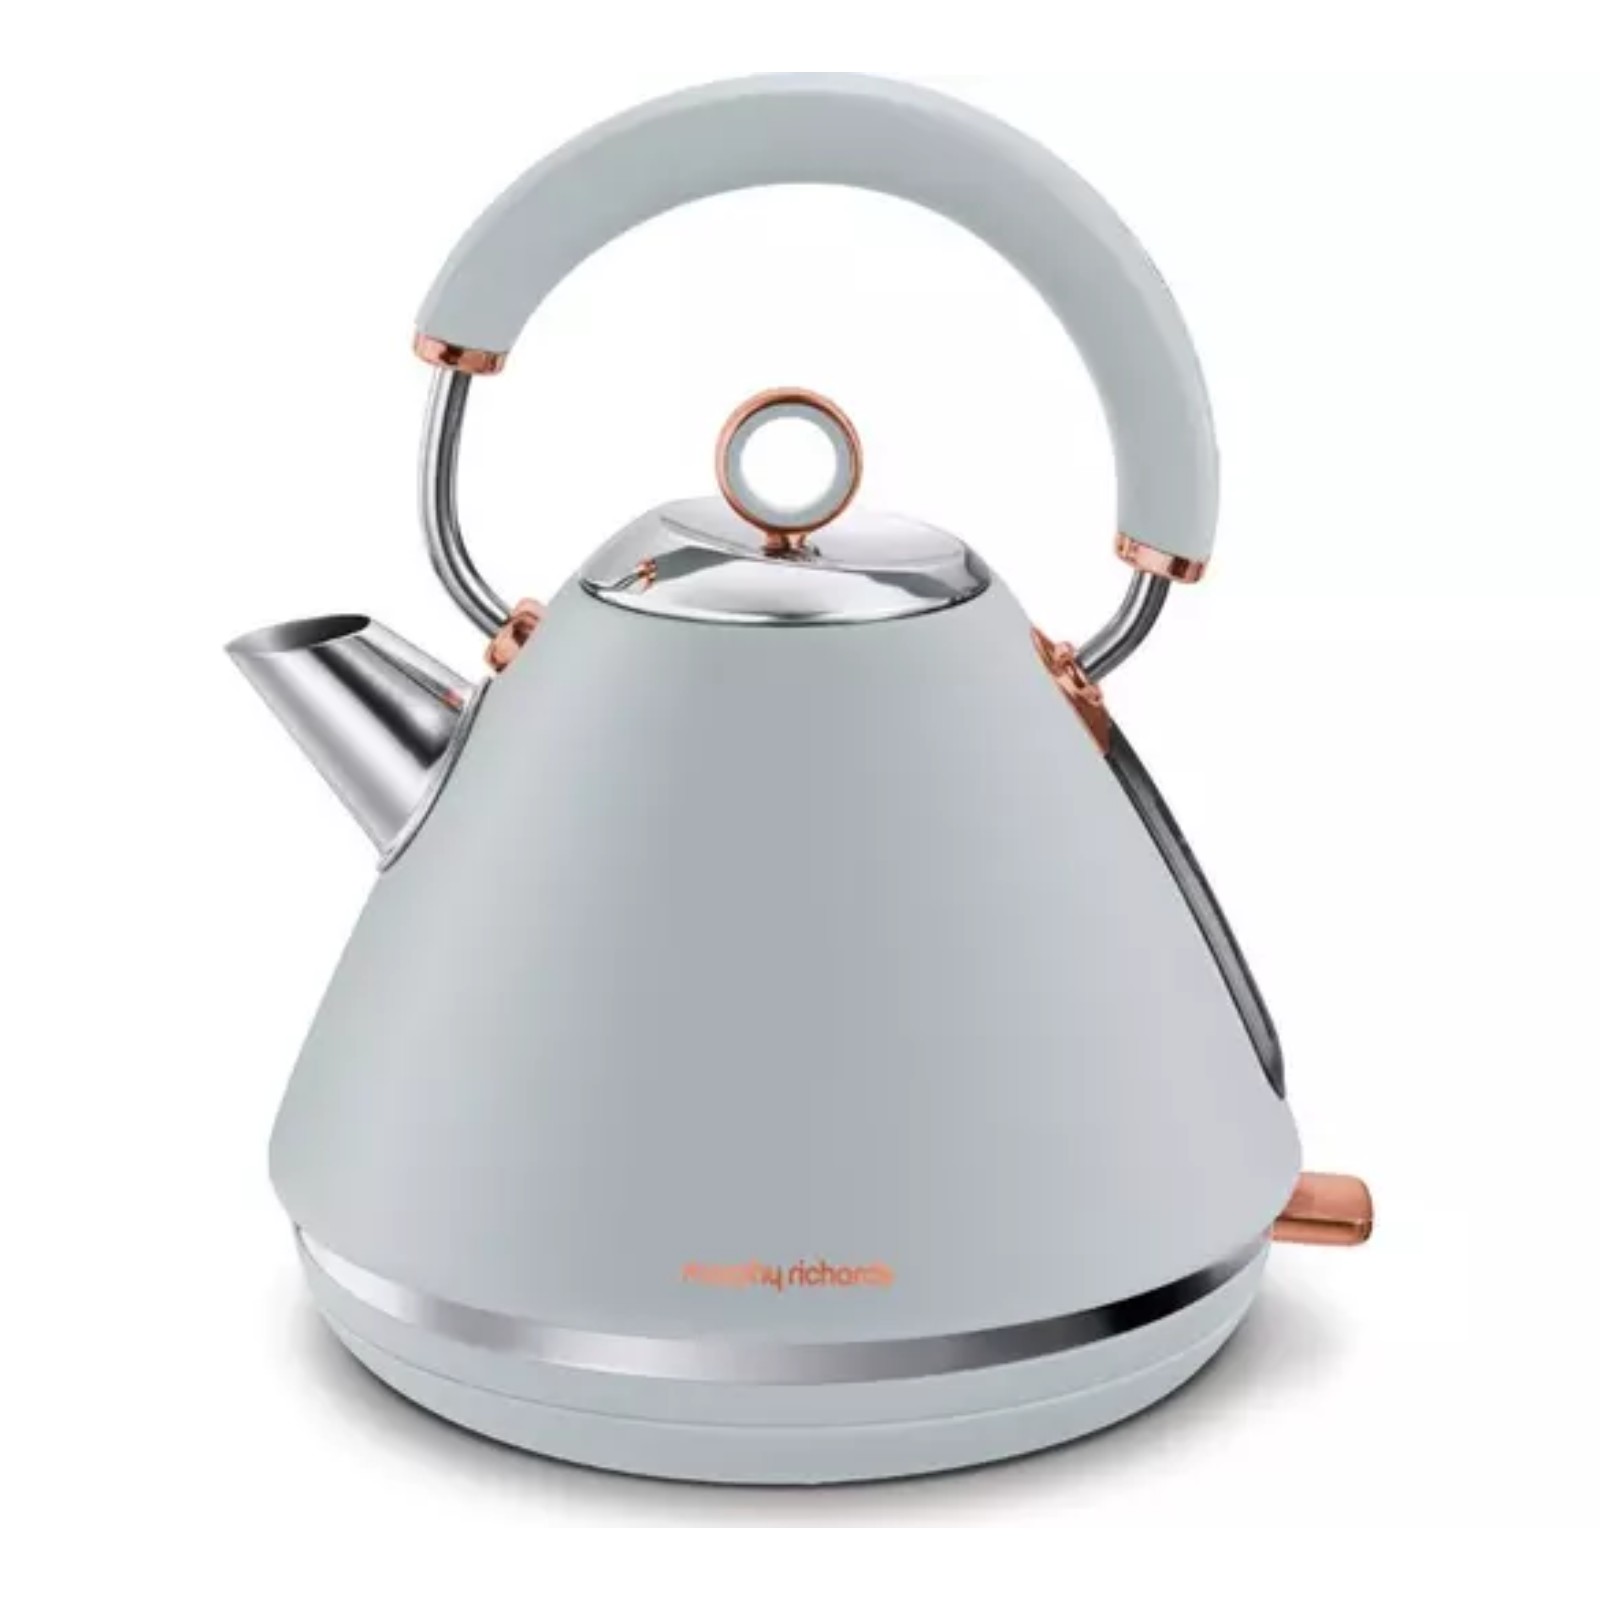 Morphy Richards 102040 Accents Rose Gold Edition 1.5L Pyramid Kettle Ocean Grey And Rose Gold